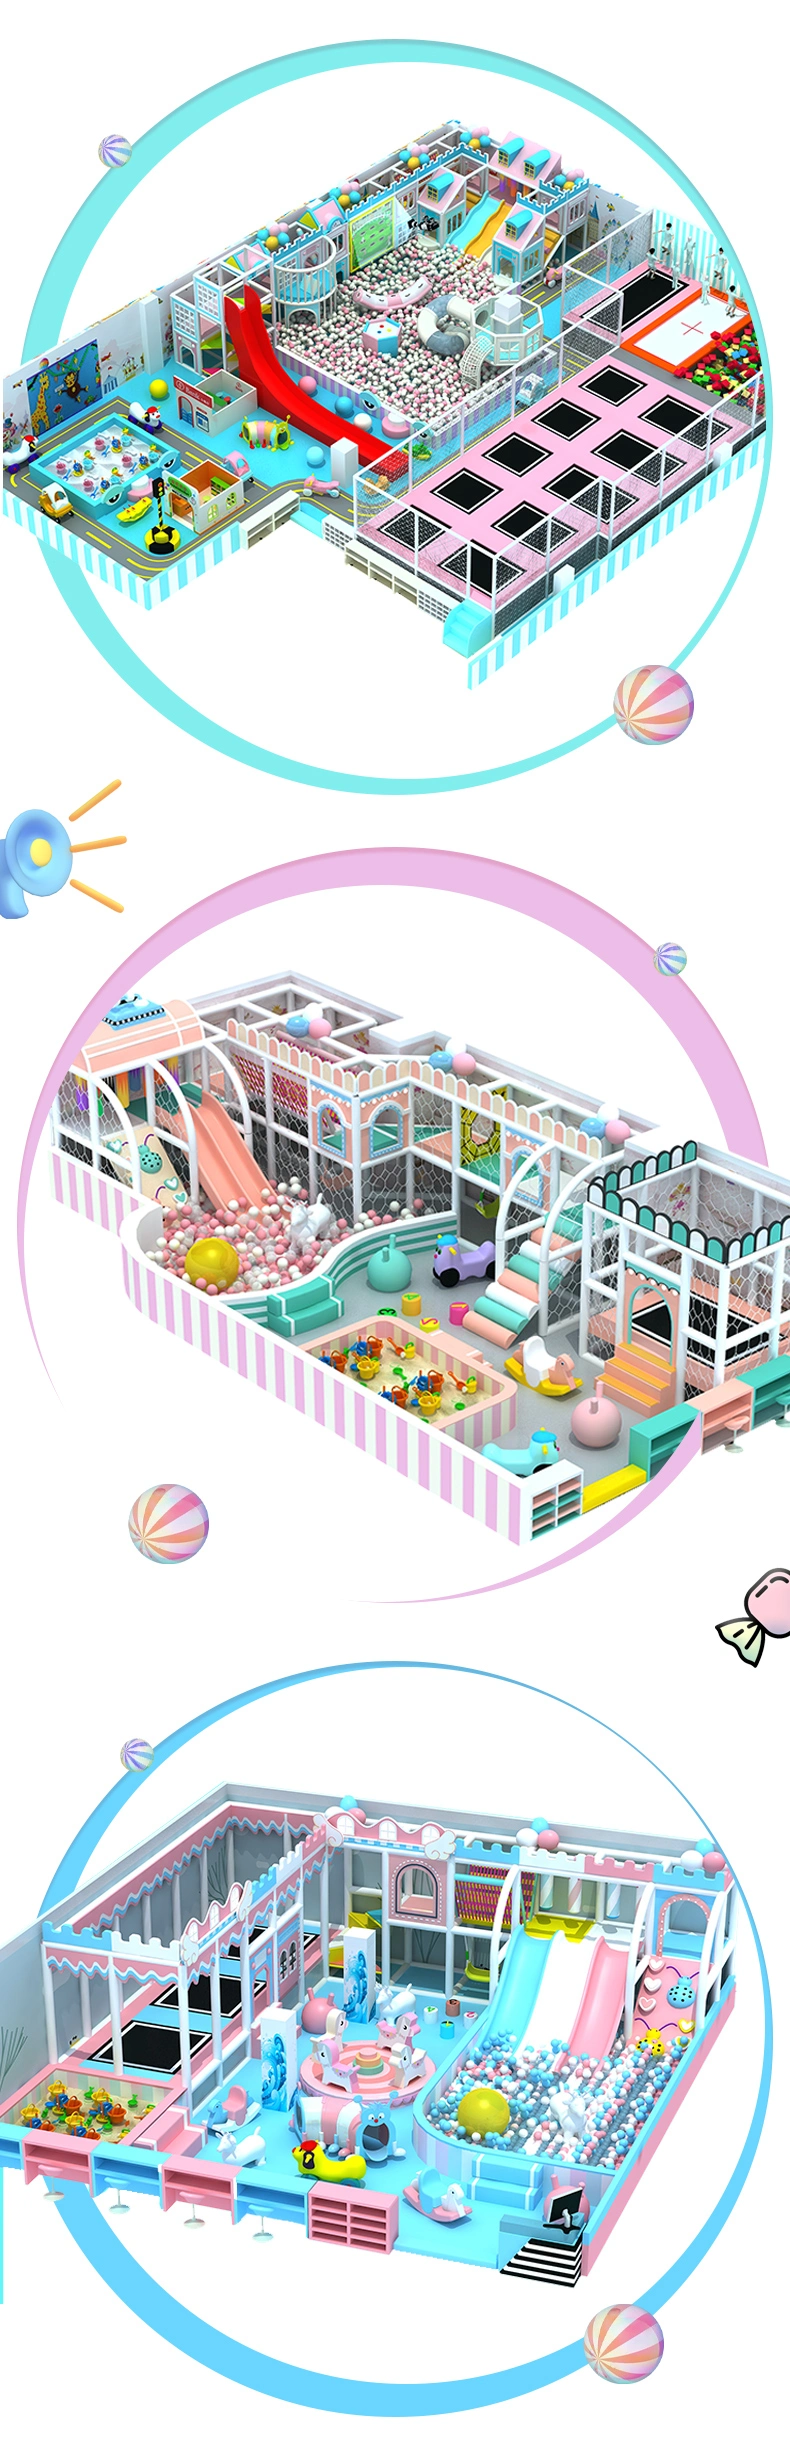 Large Indoor Playground Equipment for Shopping Malls and Supermarkets